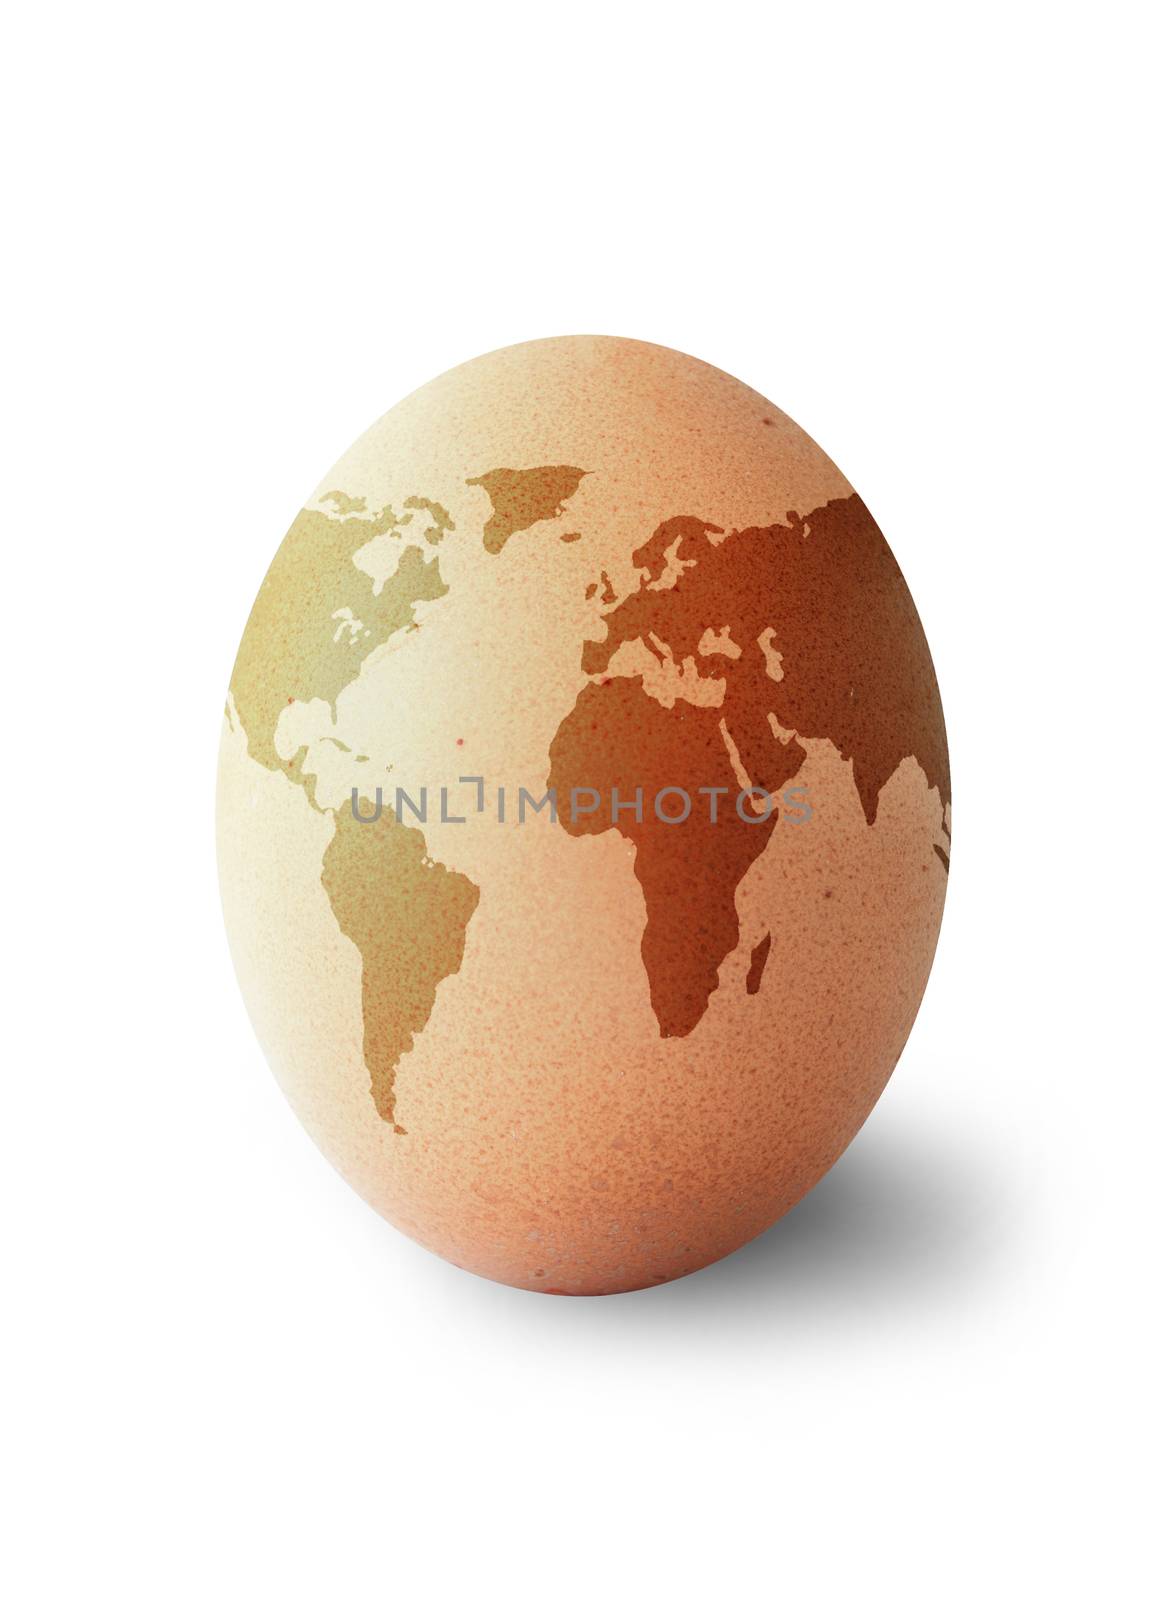 Atlas map egg over a white background